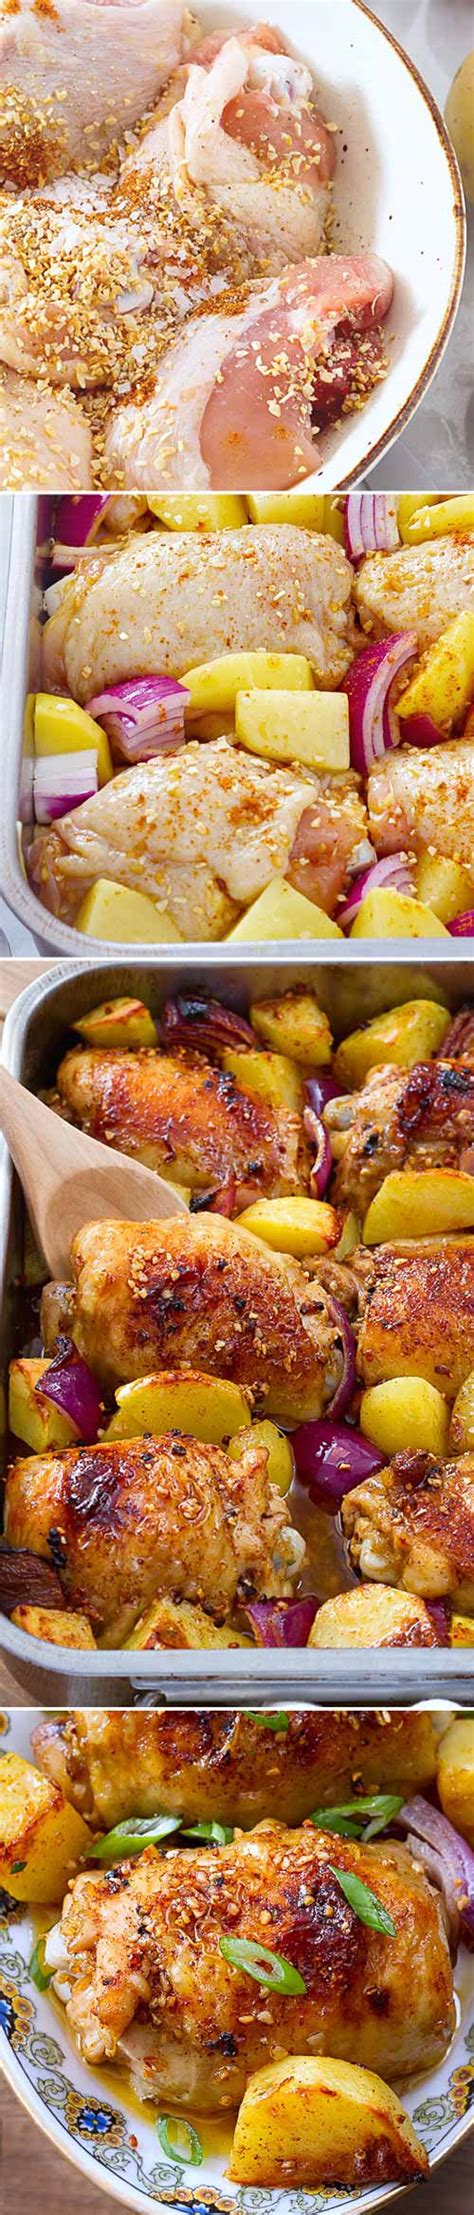 baked-garlic-chicken-and-potatoes-eatwell101 image